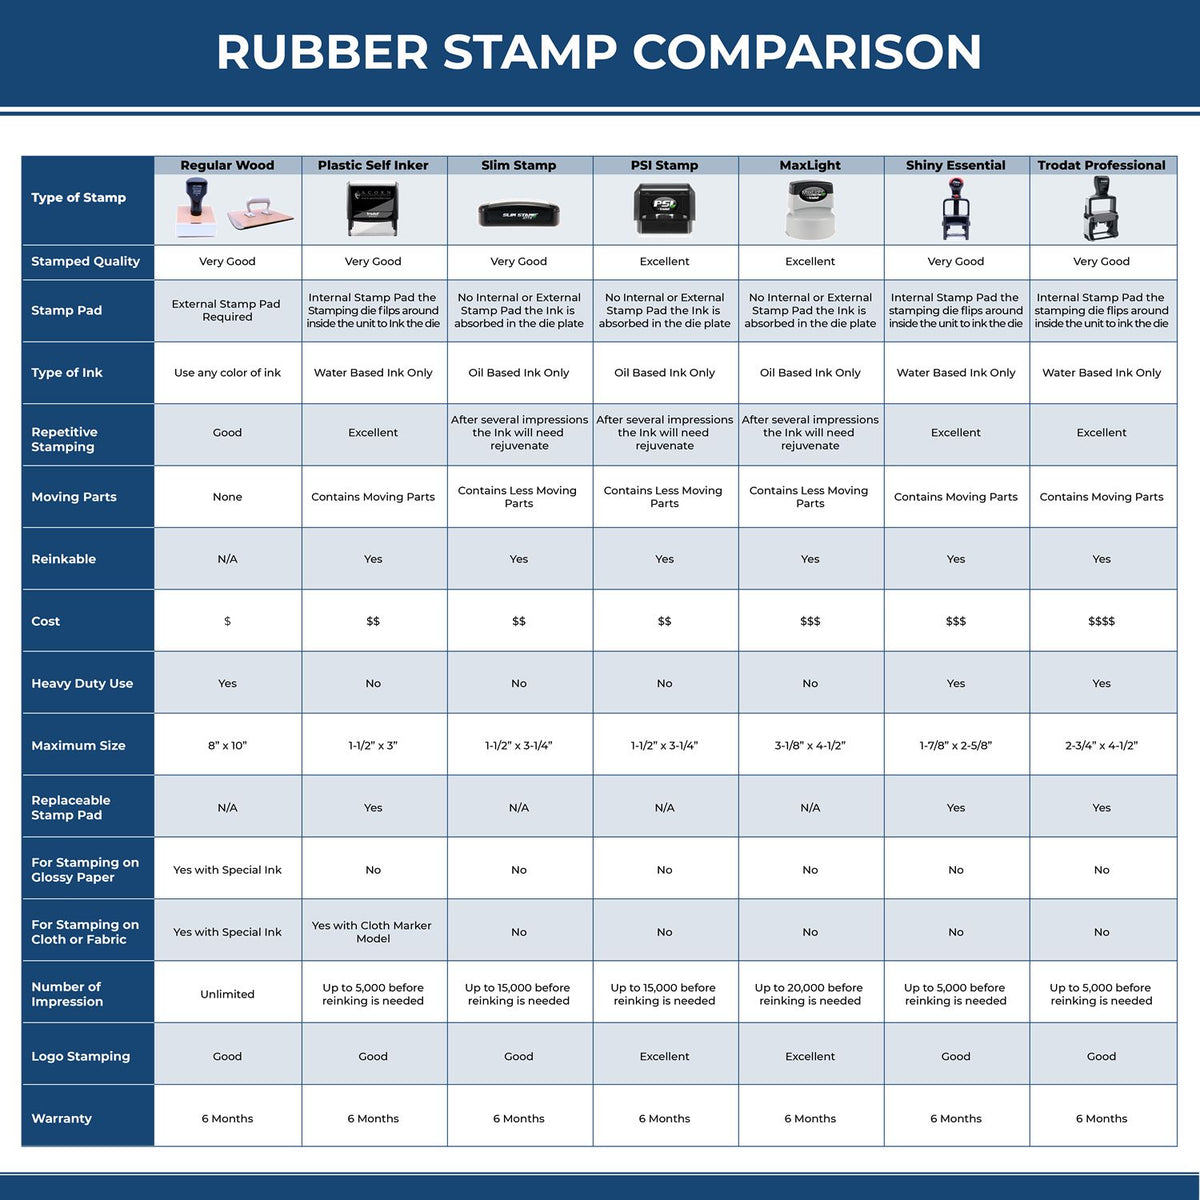 Way To Go Rubber Stamp 4373R Rubber Stamp Comparison